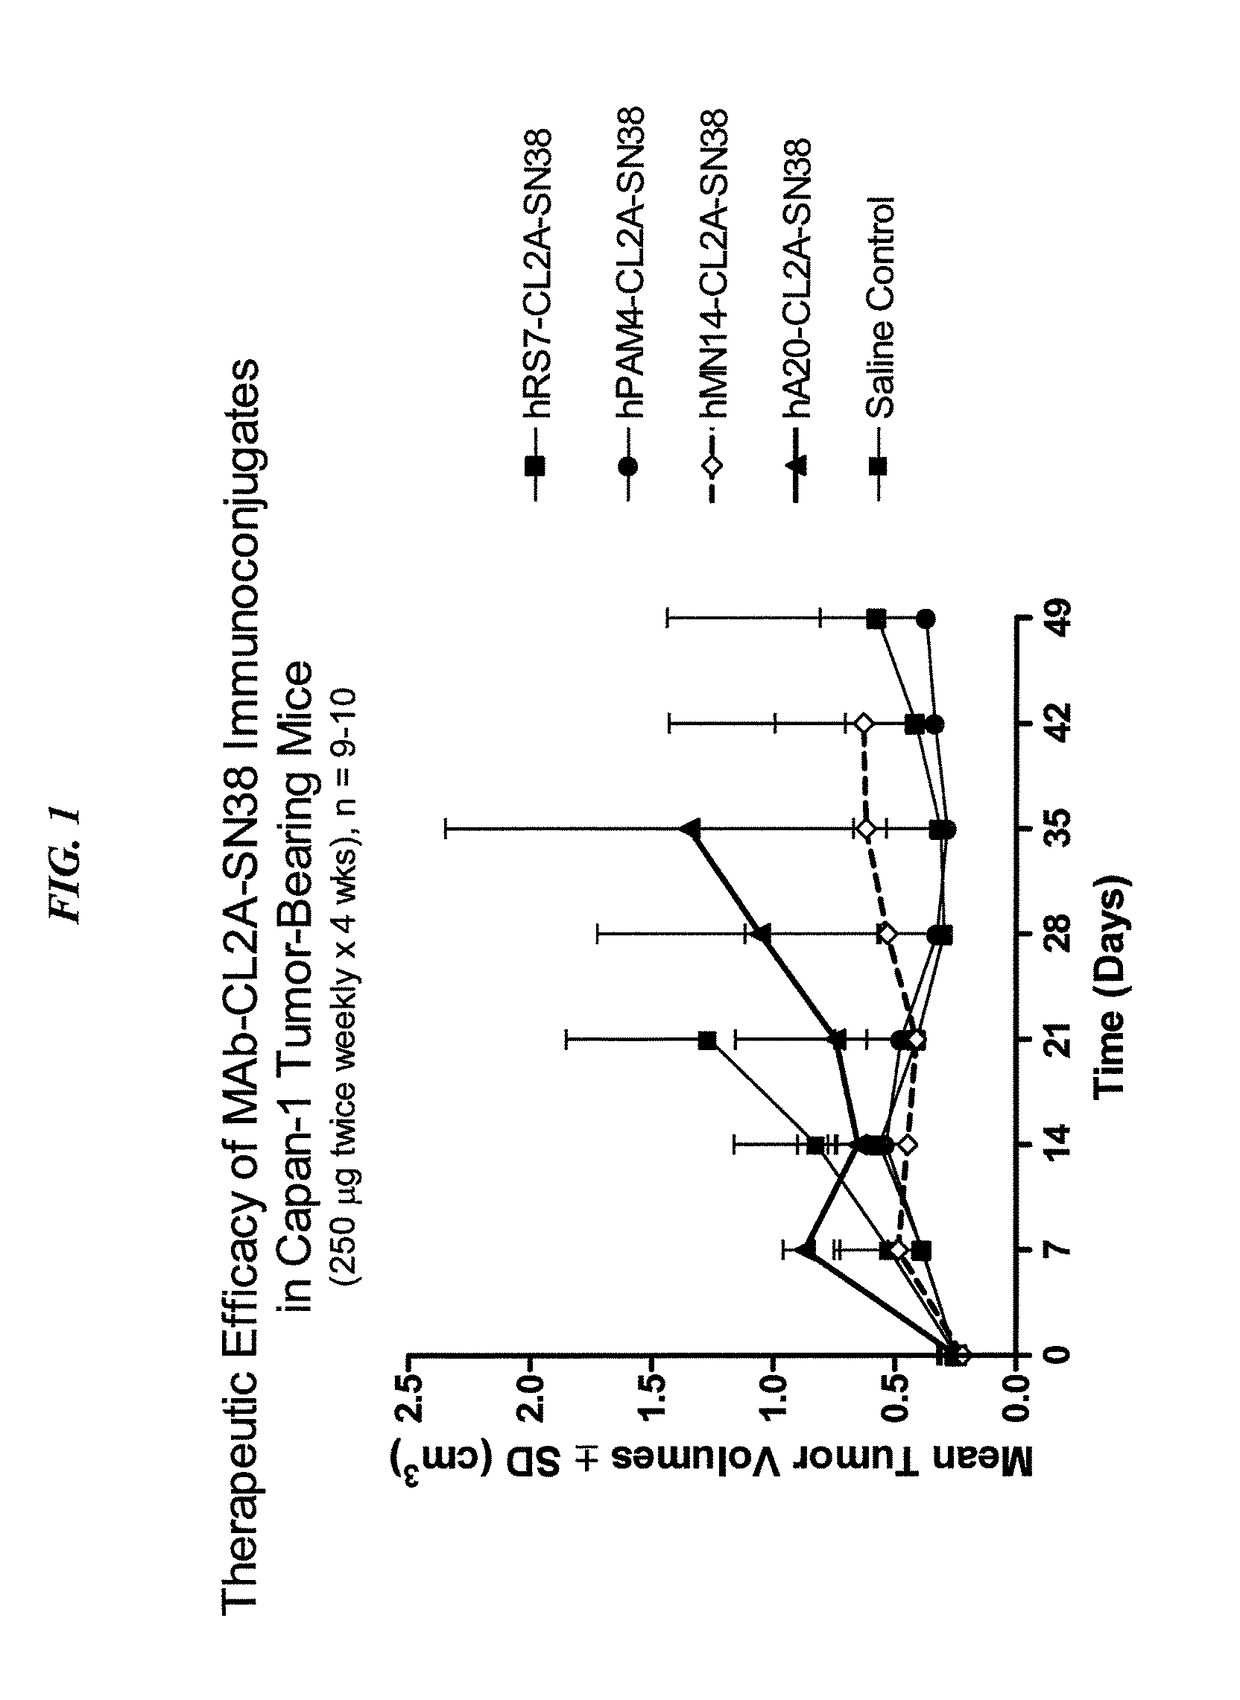 Dosages of immunoconjugates of antibodies and SN-38 for improved efficacy and decreased toxicity